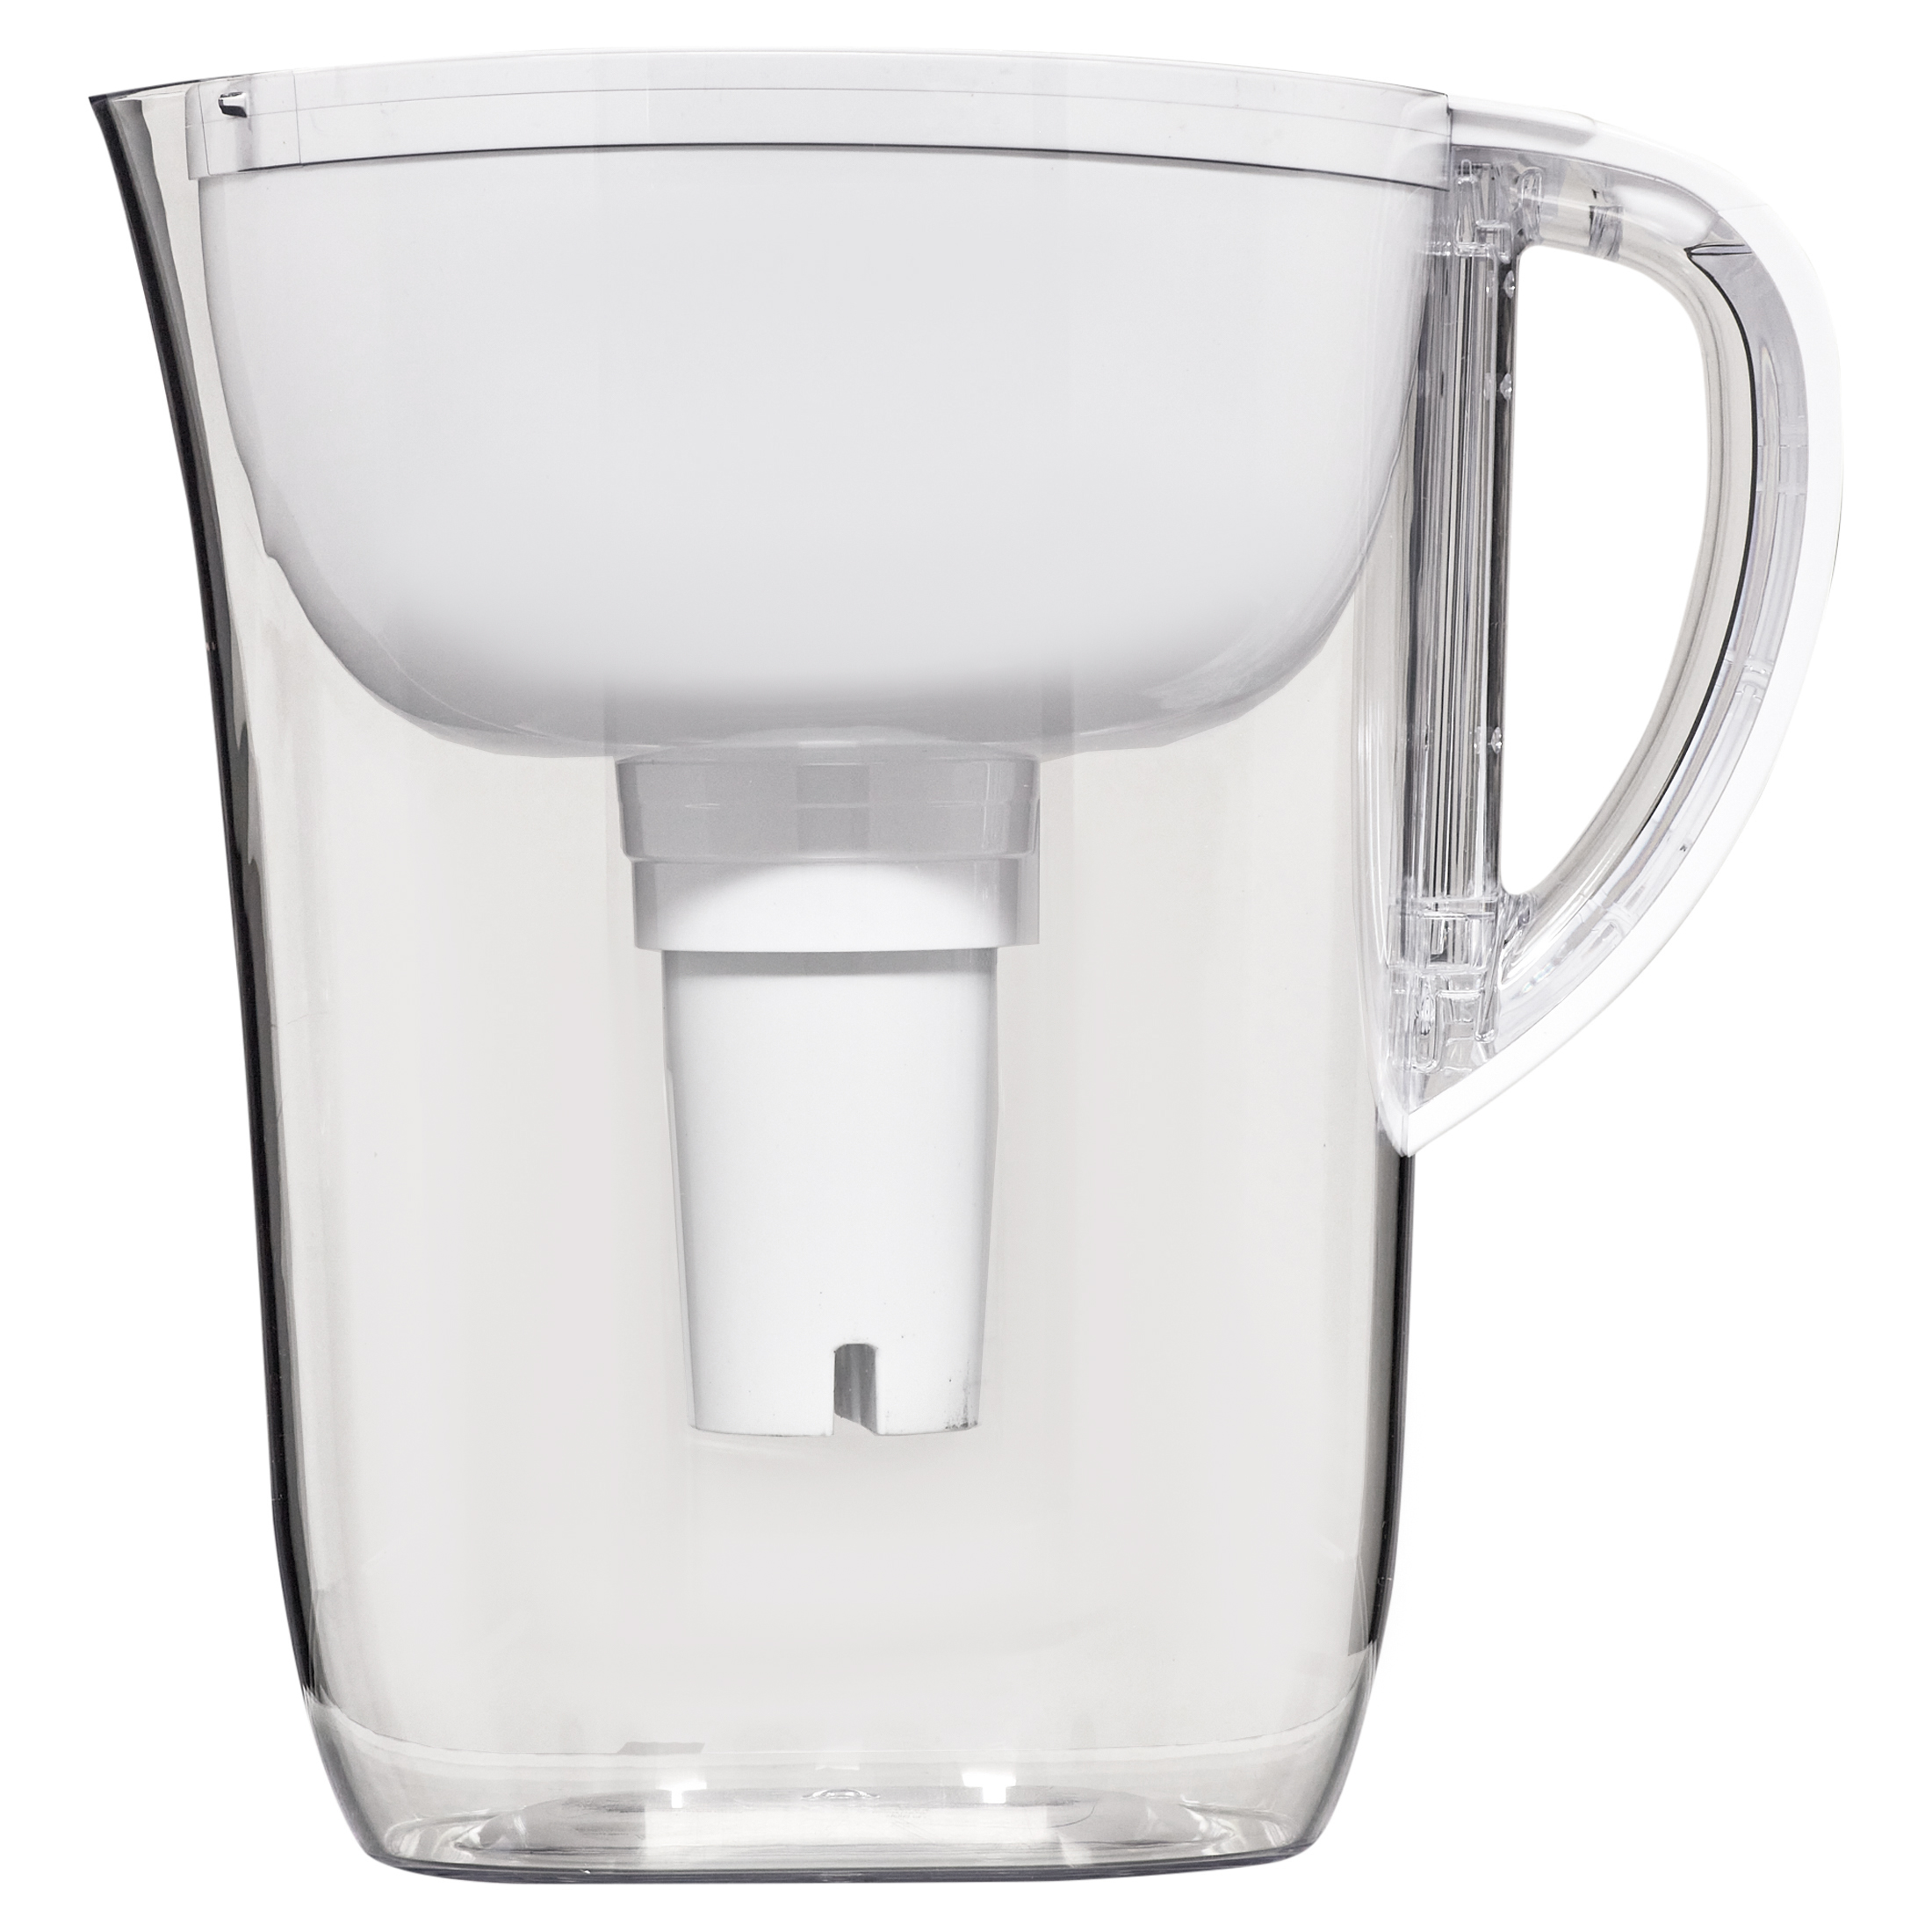 Brita Large 10 Cup Water Filter Pitcher with 1 Standard Filter, BPA Free, Everyday, White - image 2 of 10